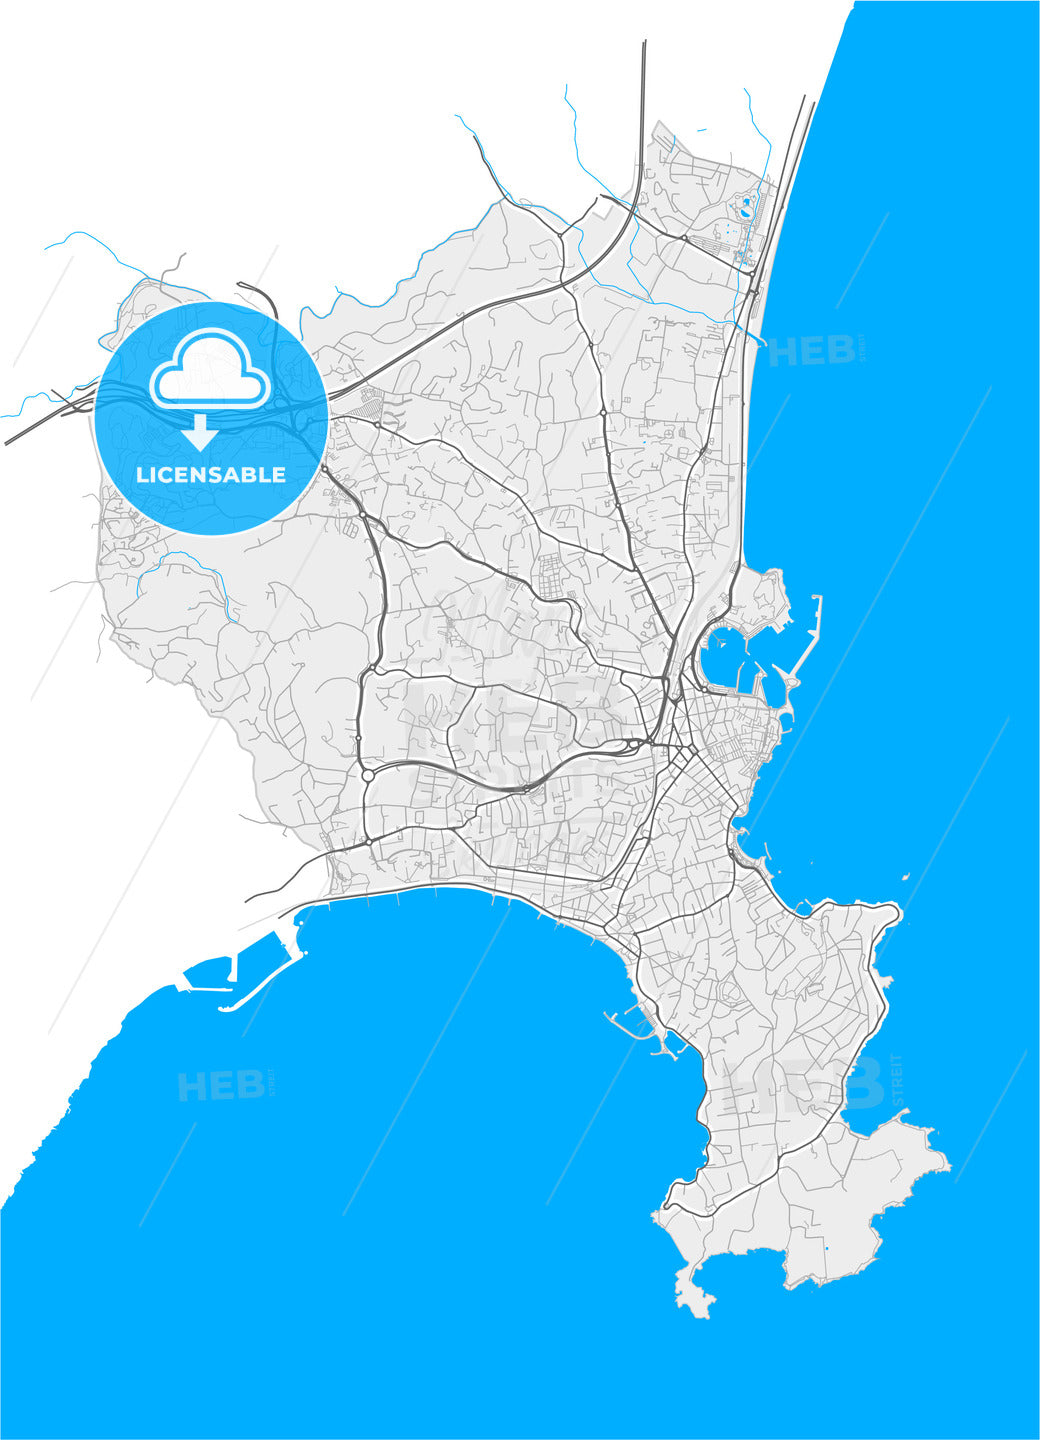 Antibes, Alpes-Maritimes, France, high quality vector map